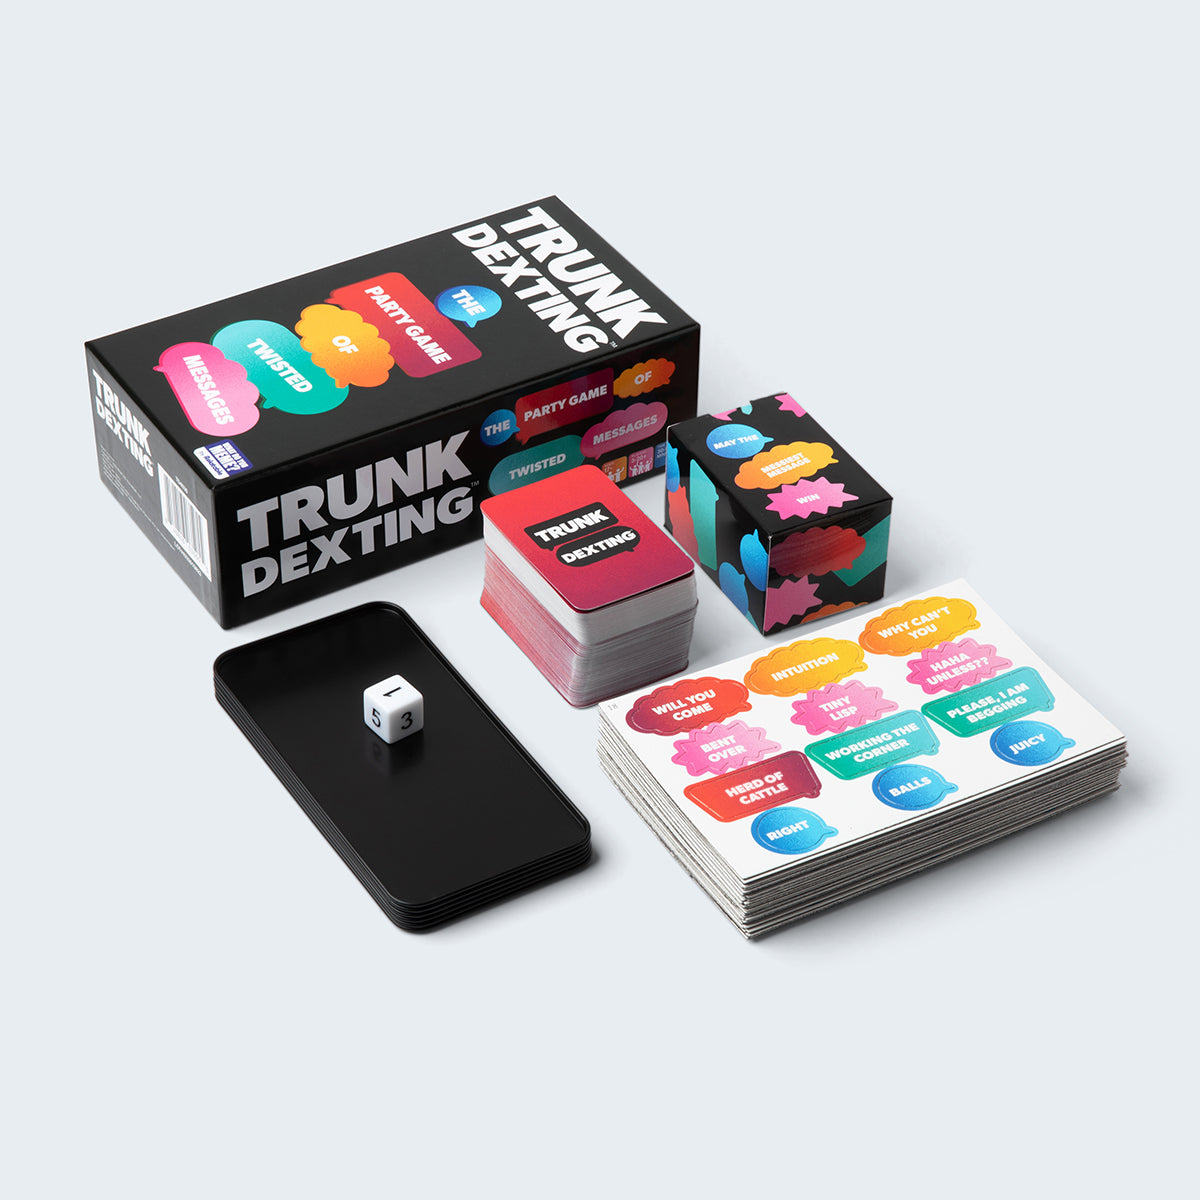 Trunk Dexting — The Card Game of Twisted Texts from the Creators of New Phone, Who Dis?